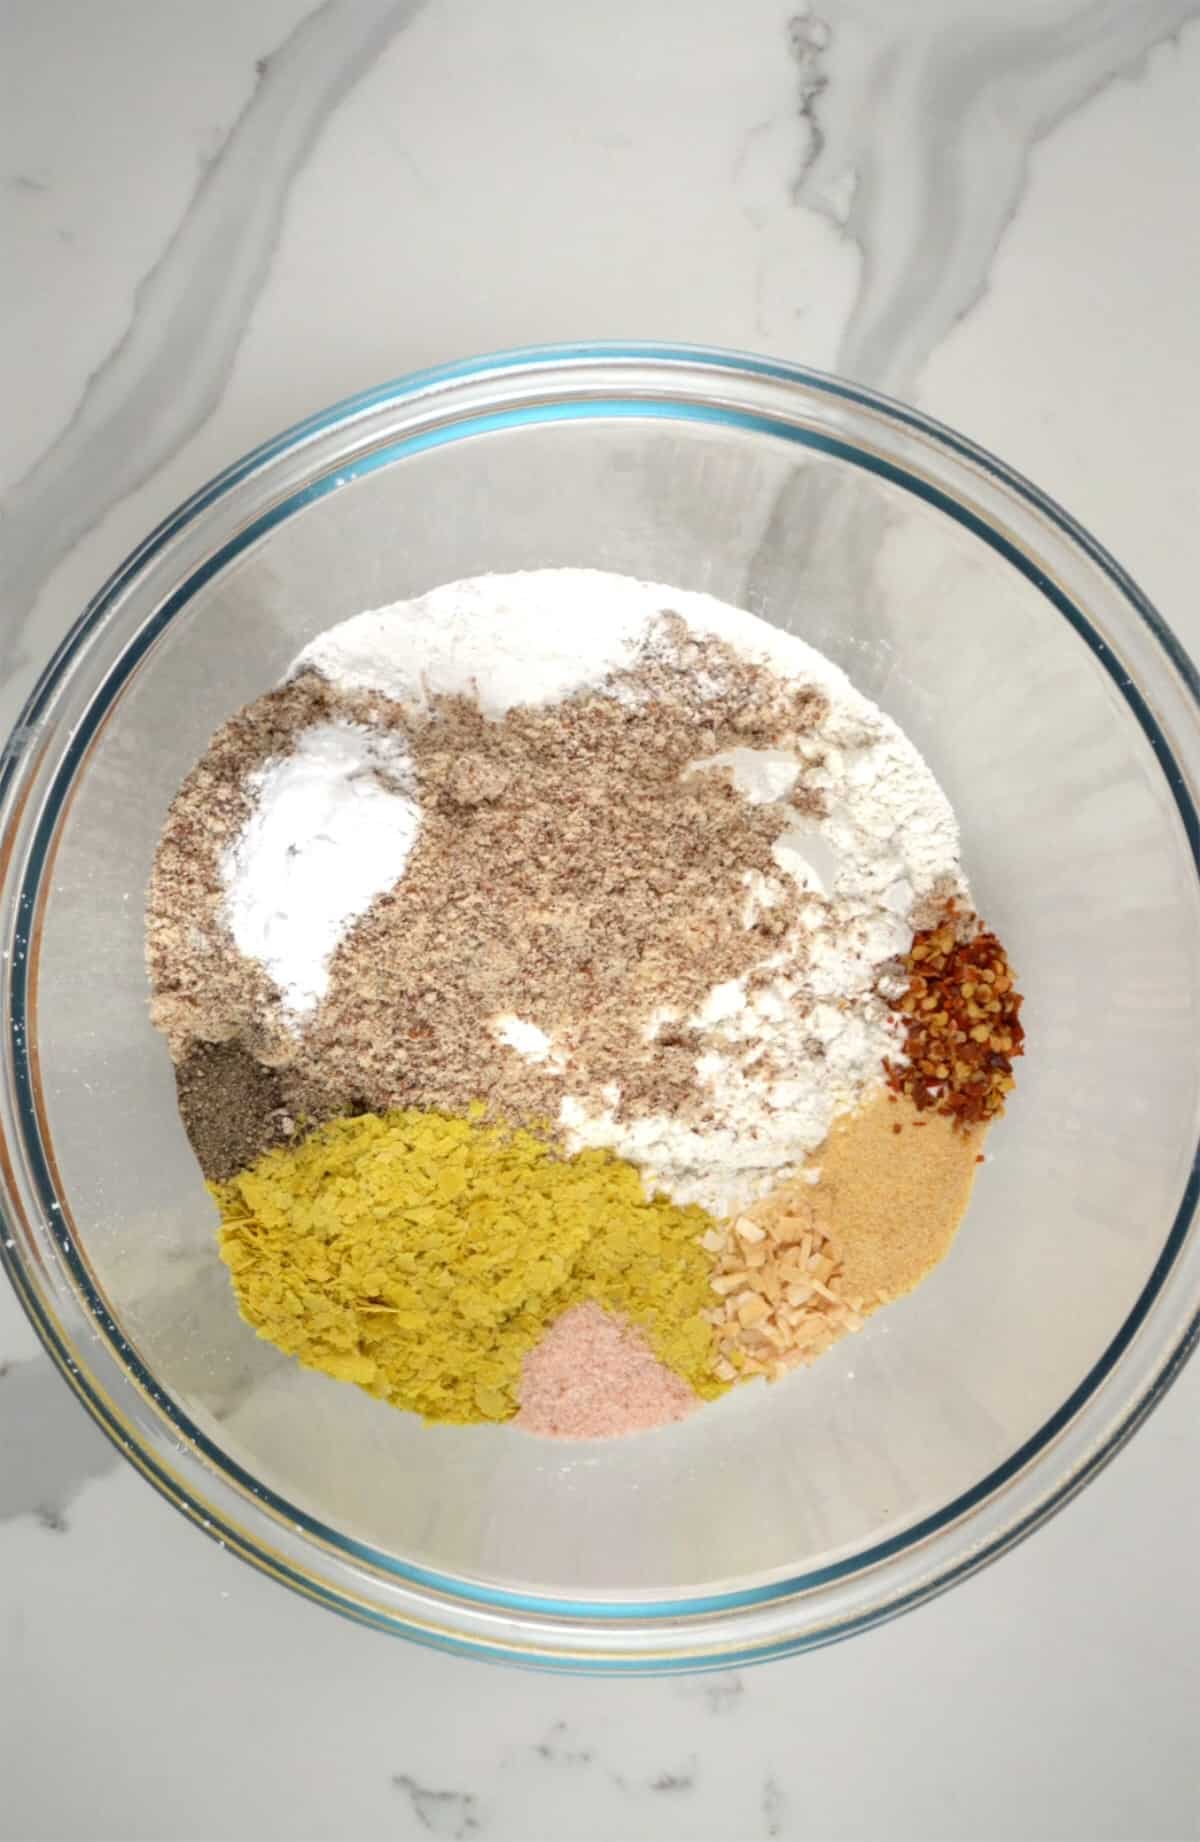 different flours and seasoning in a glass bowl